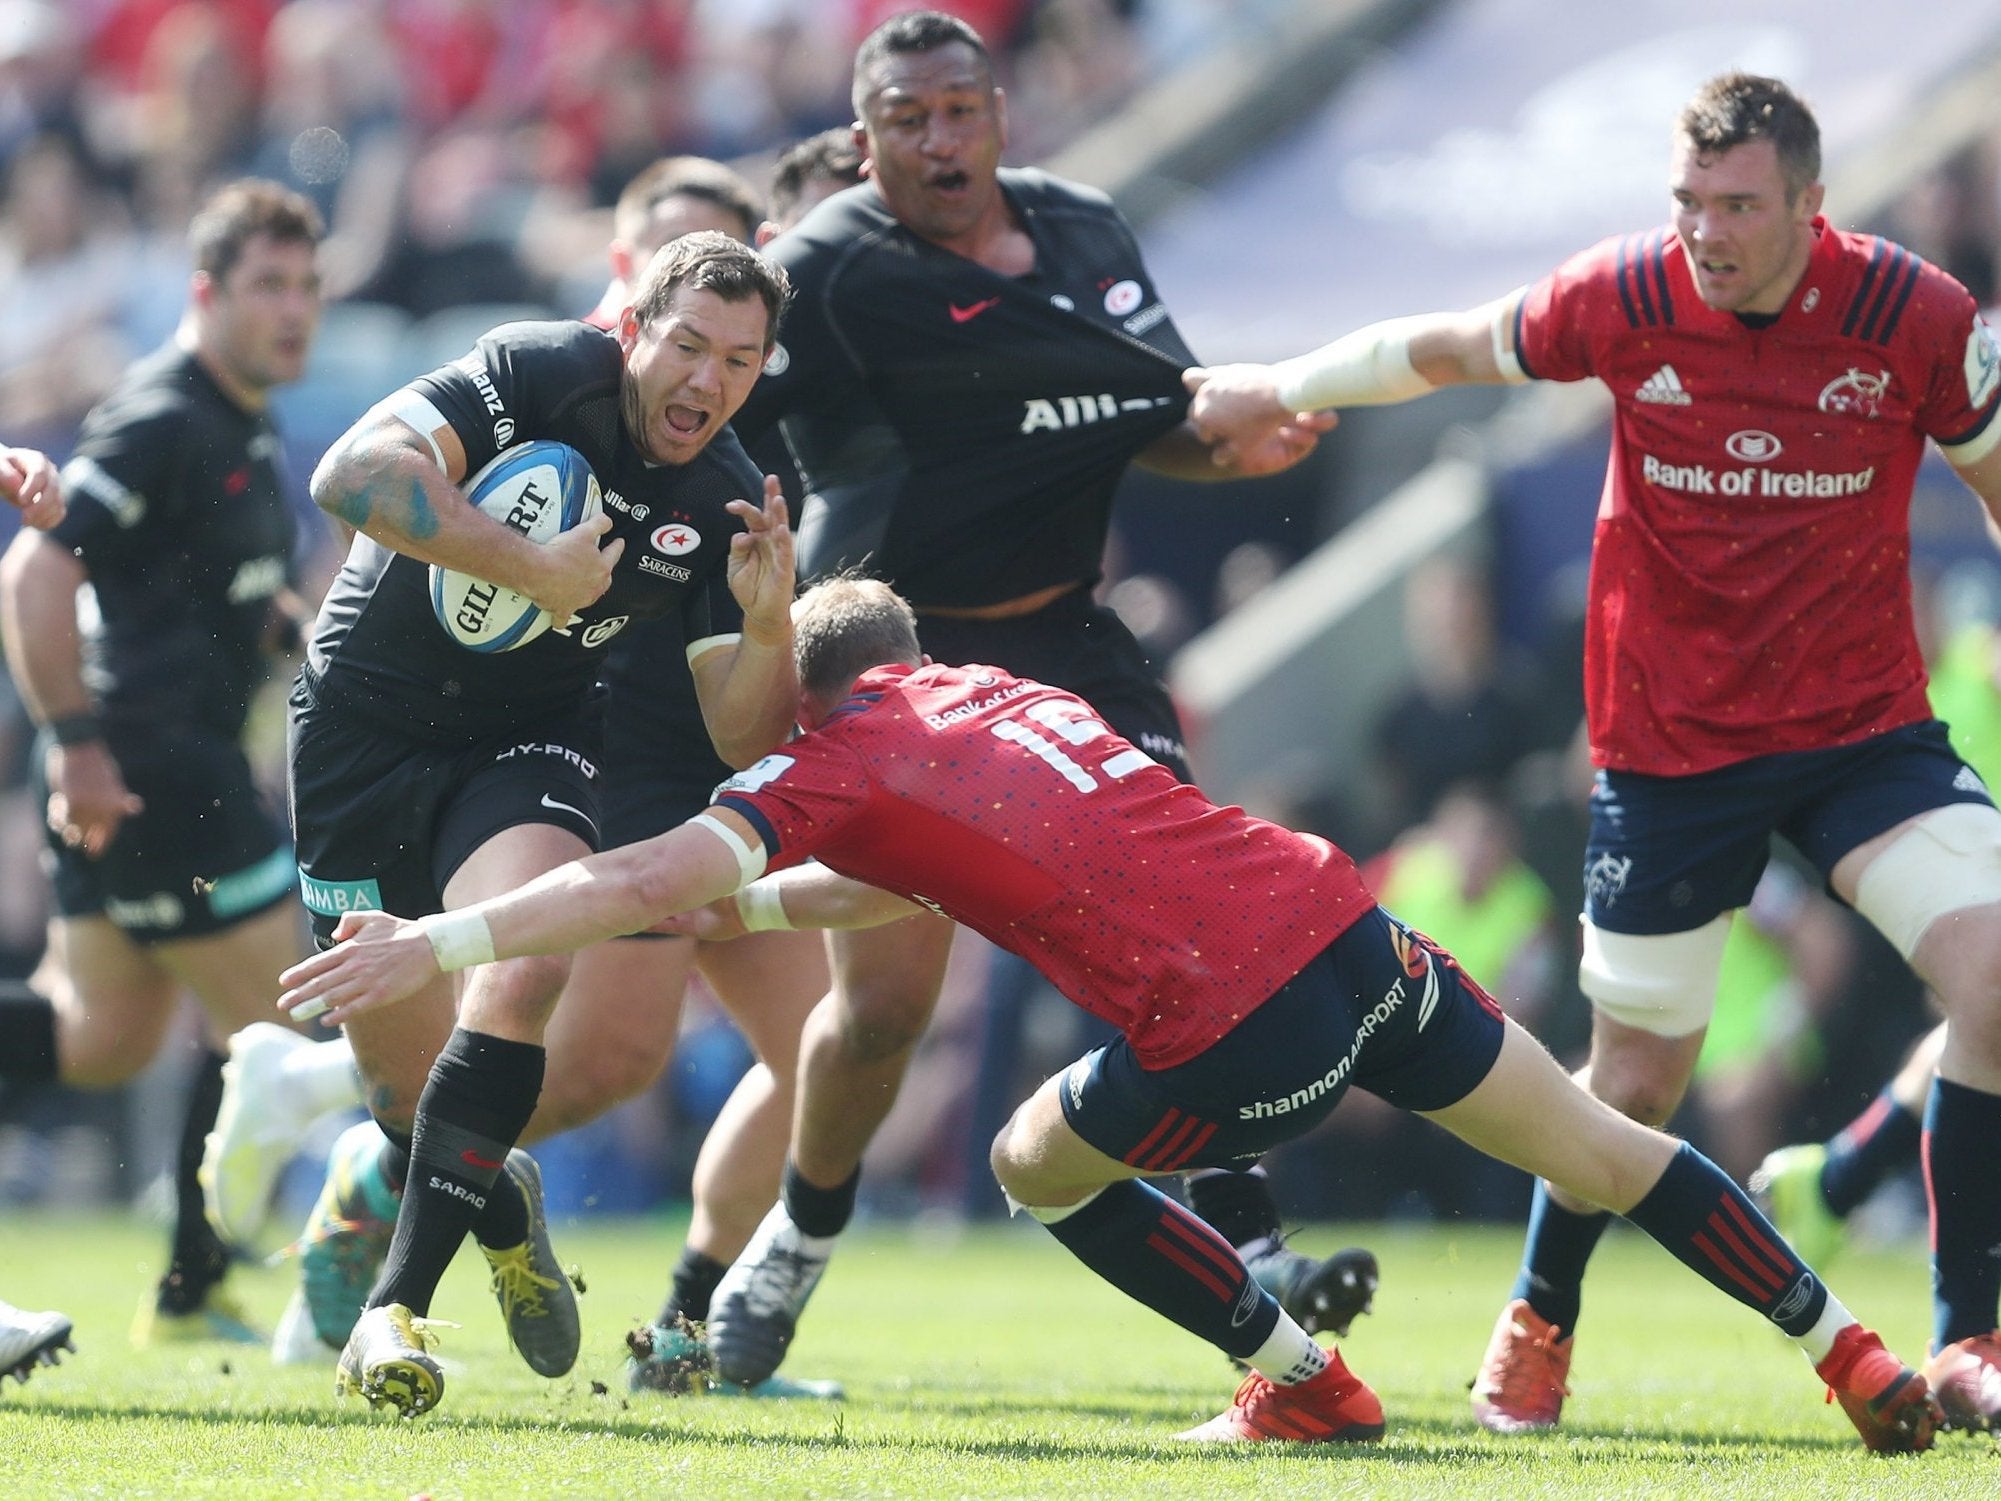 Saracens vs Munster LIVE stream online Latest rugby score, updates, TV channel, prediction, Champions Cup semi-finals The Independent The Independent